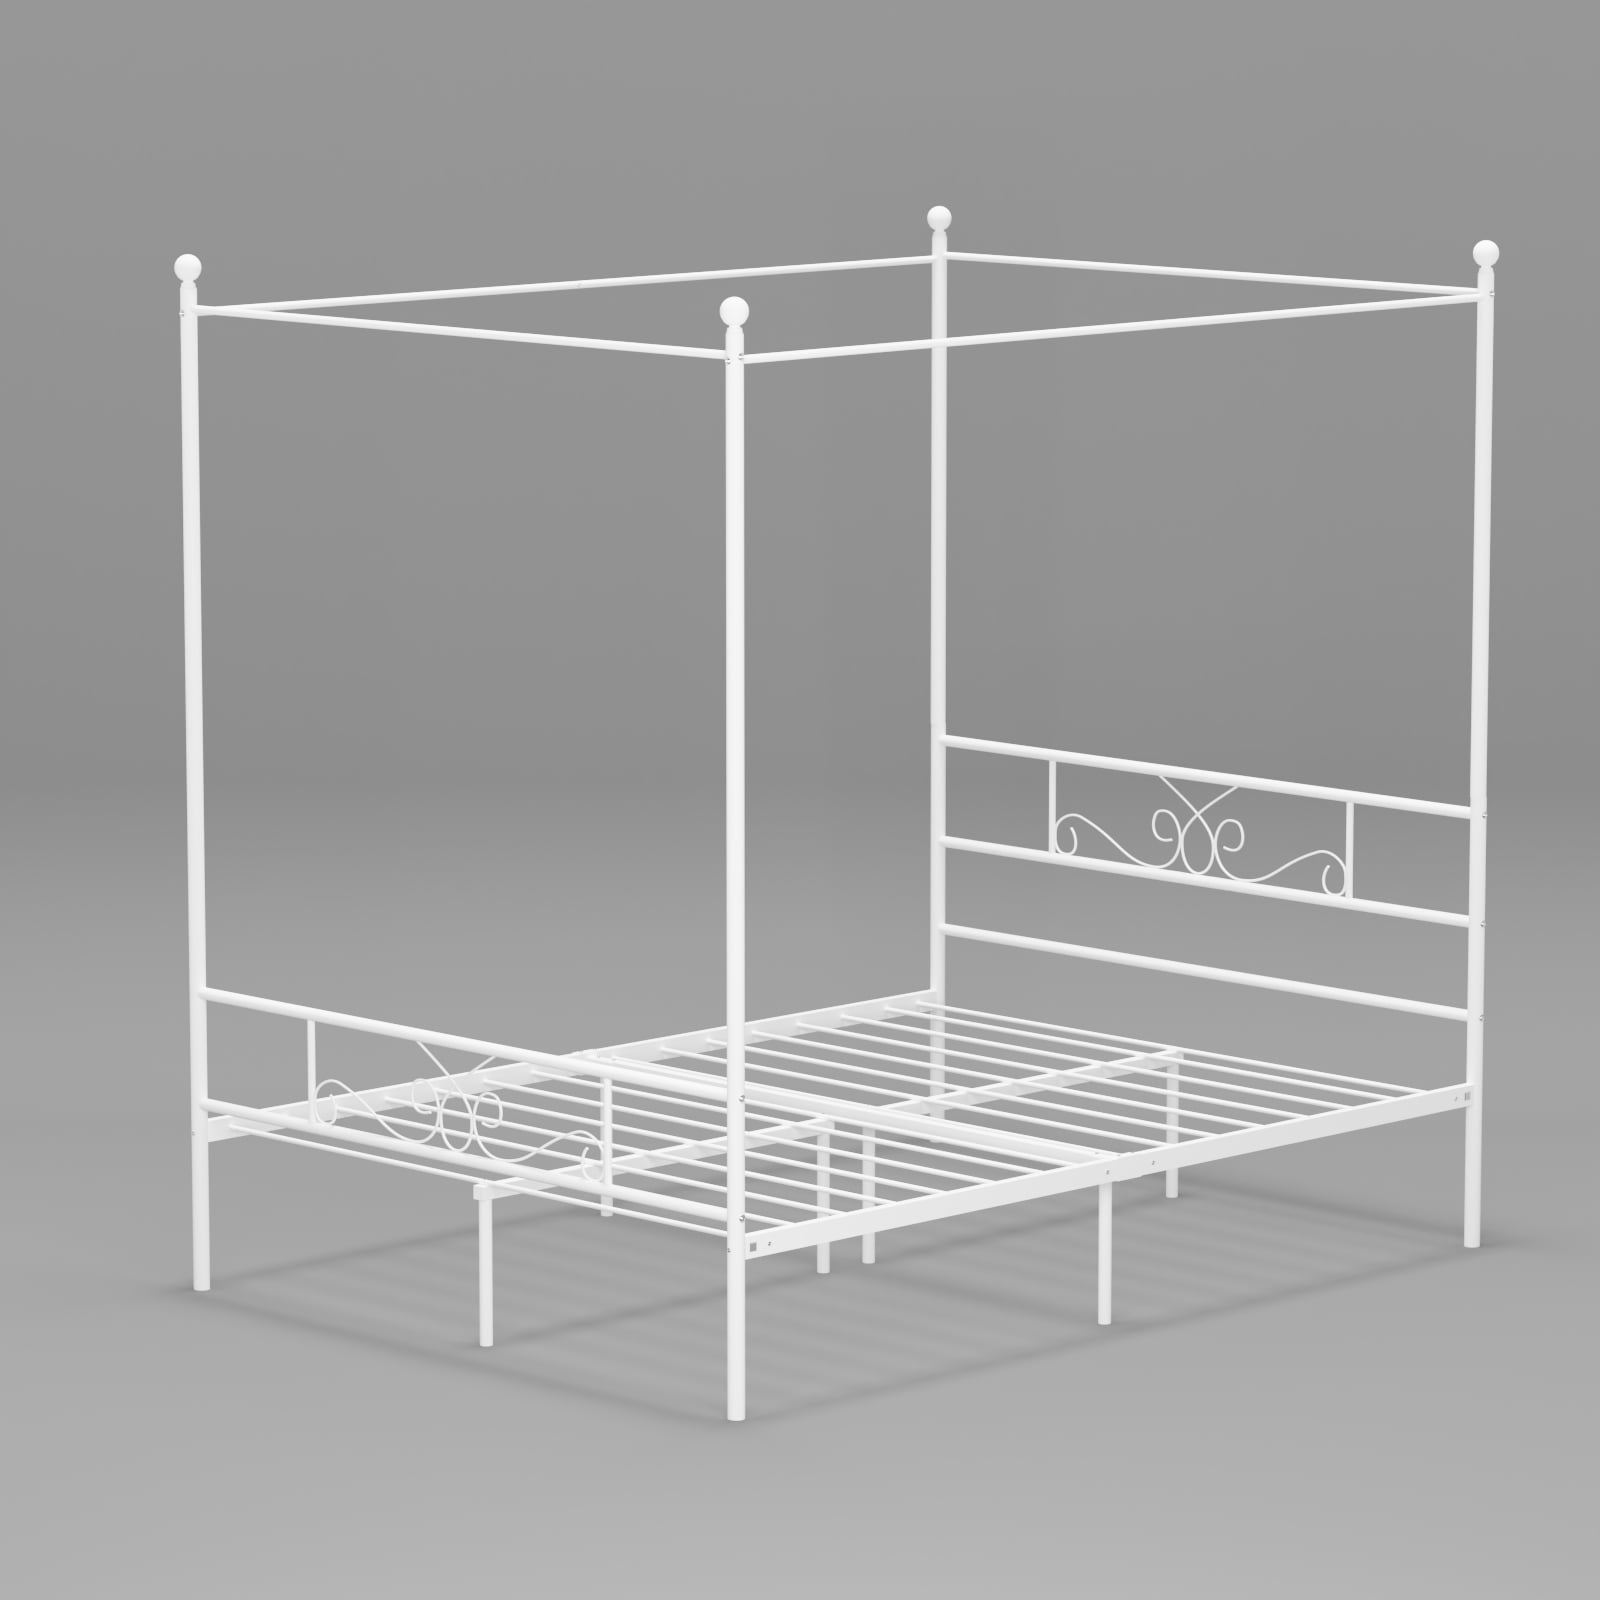 Post Metal Queen Canopy Bed Frame, White Canopy Bed Frame Full